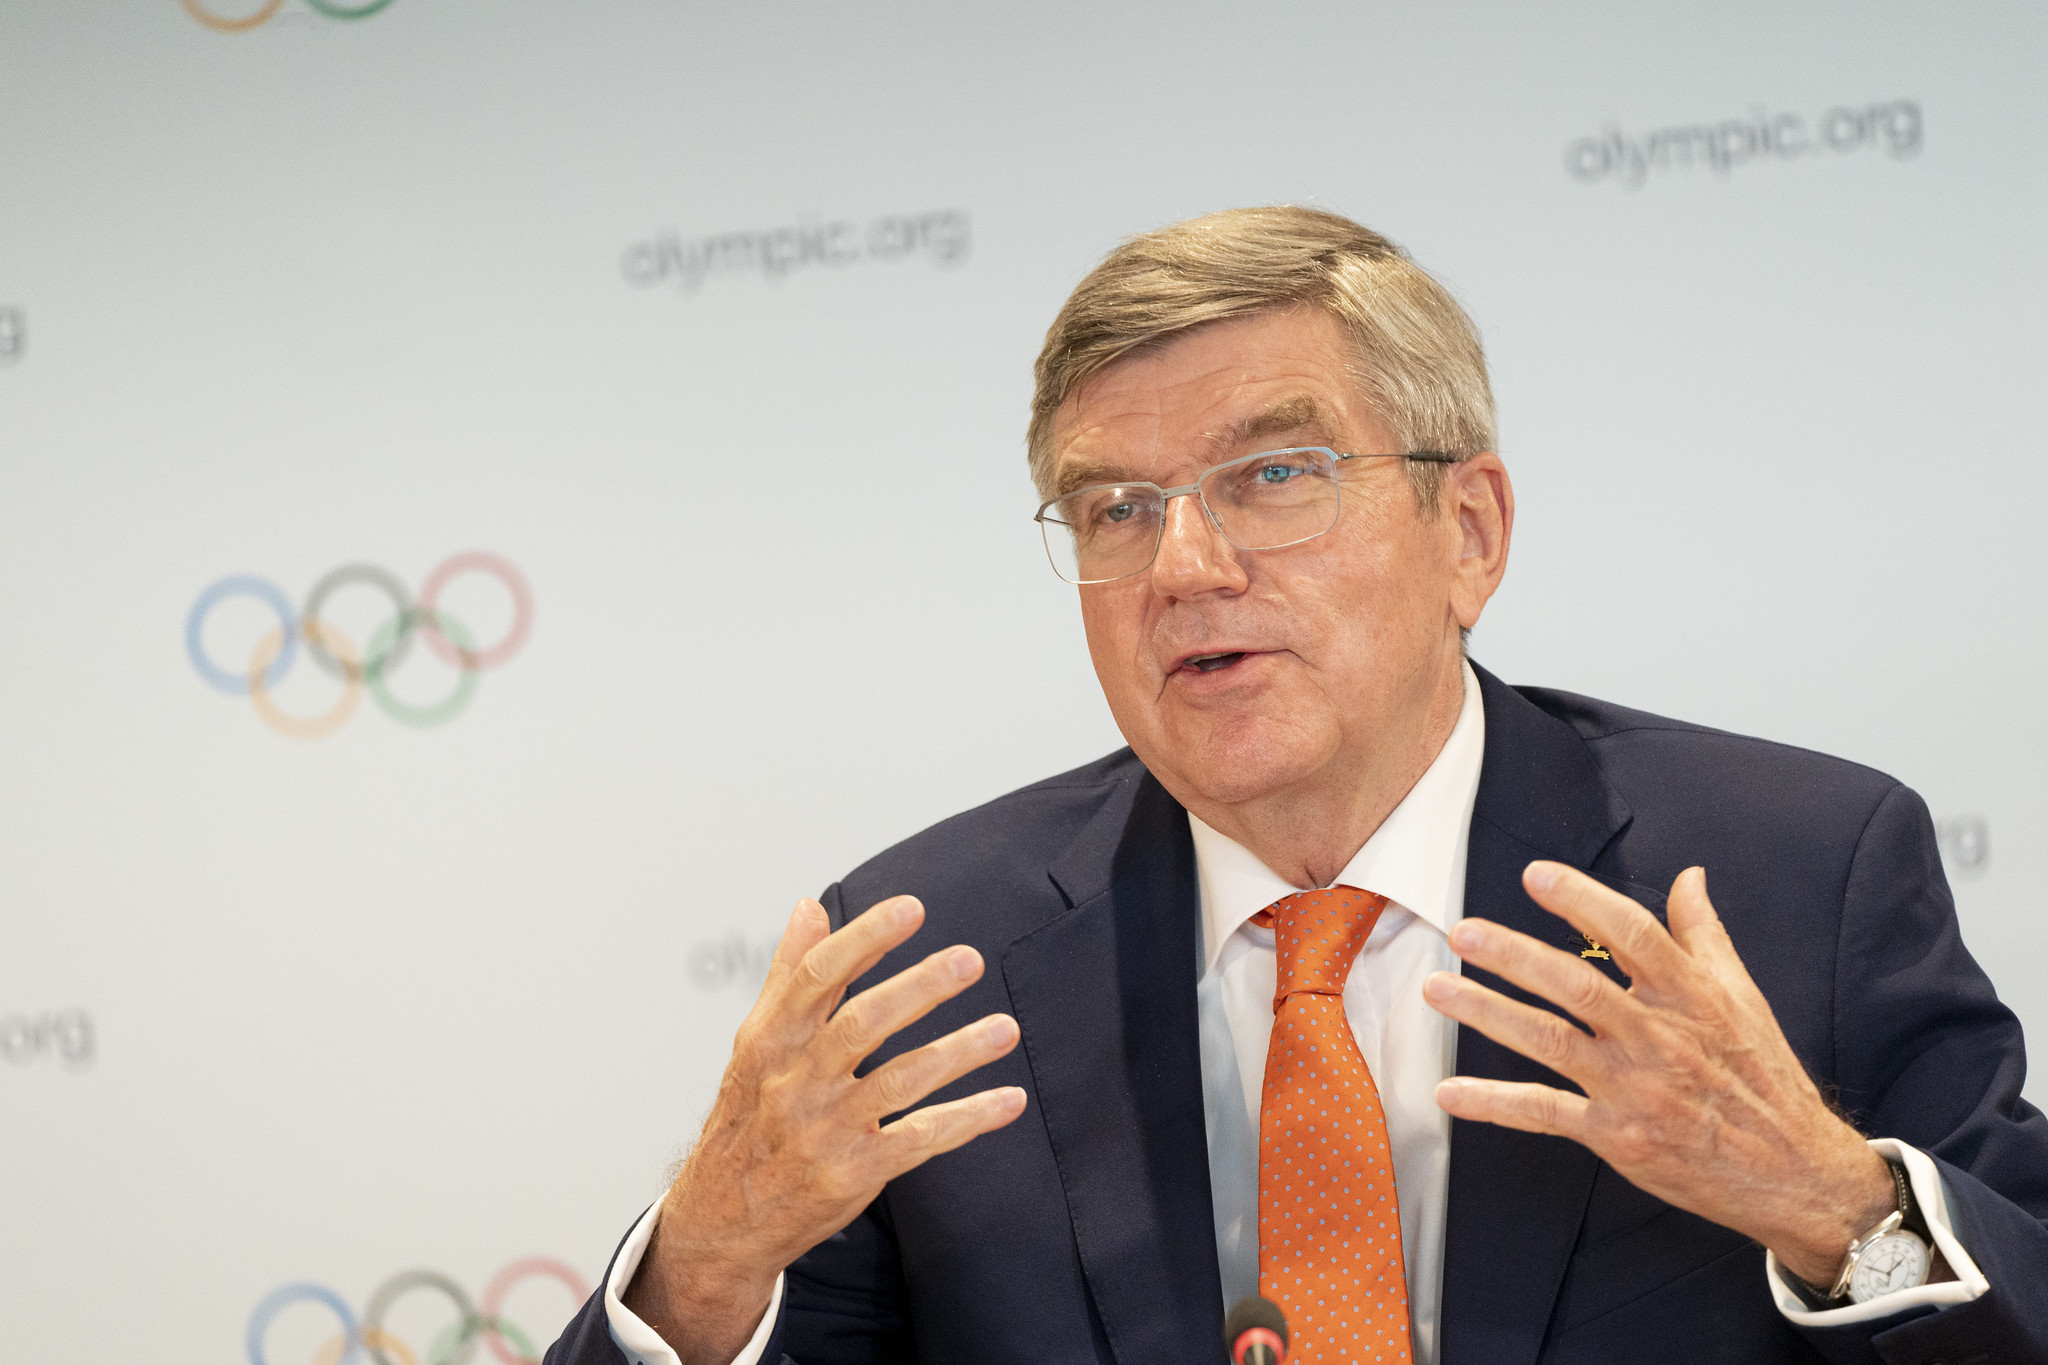 IOC President Thomas Bach has insisted the organisation will not partner with violent video games ©IOC